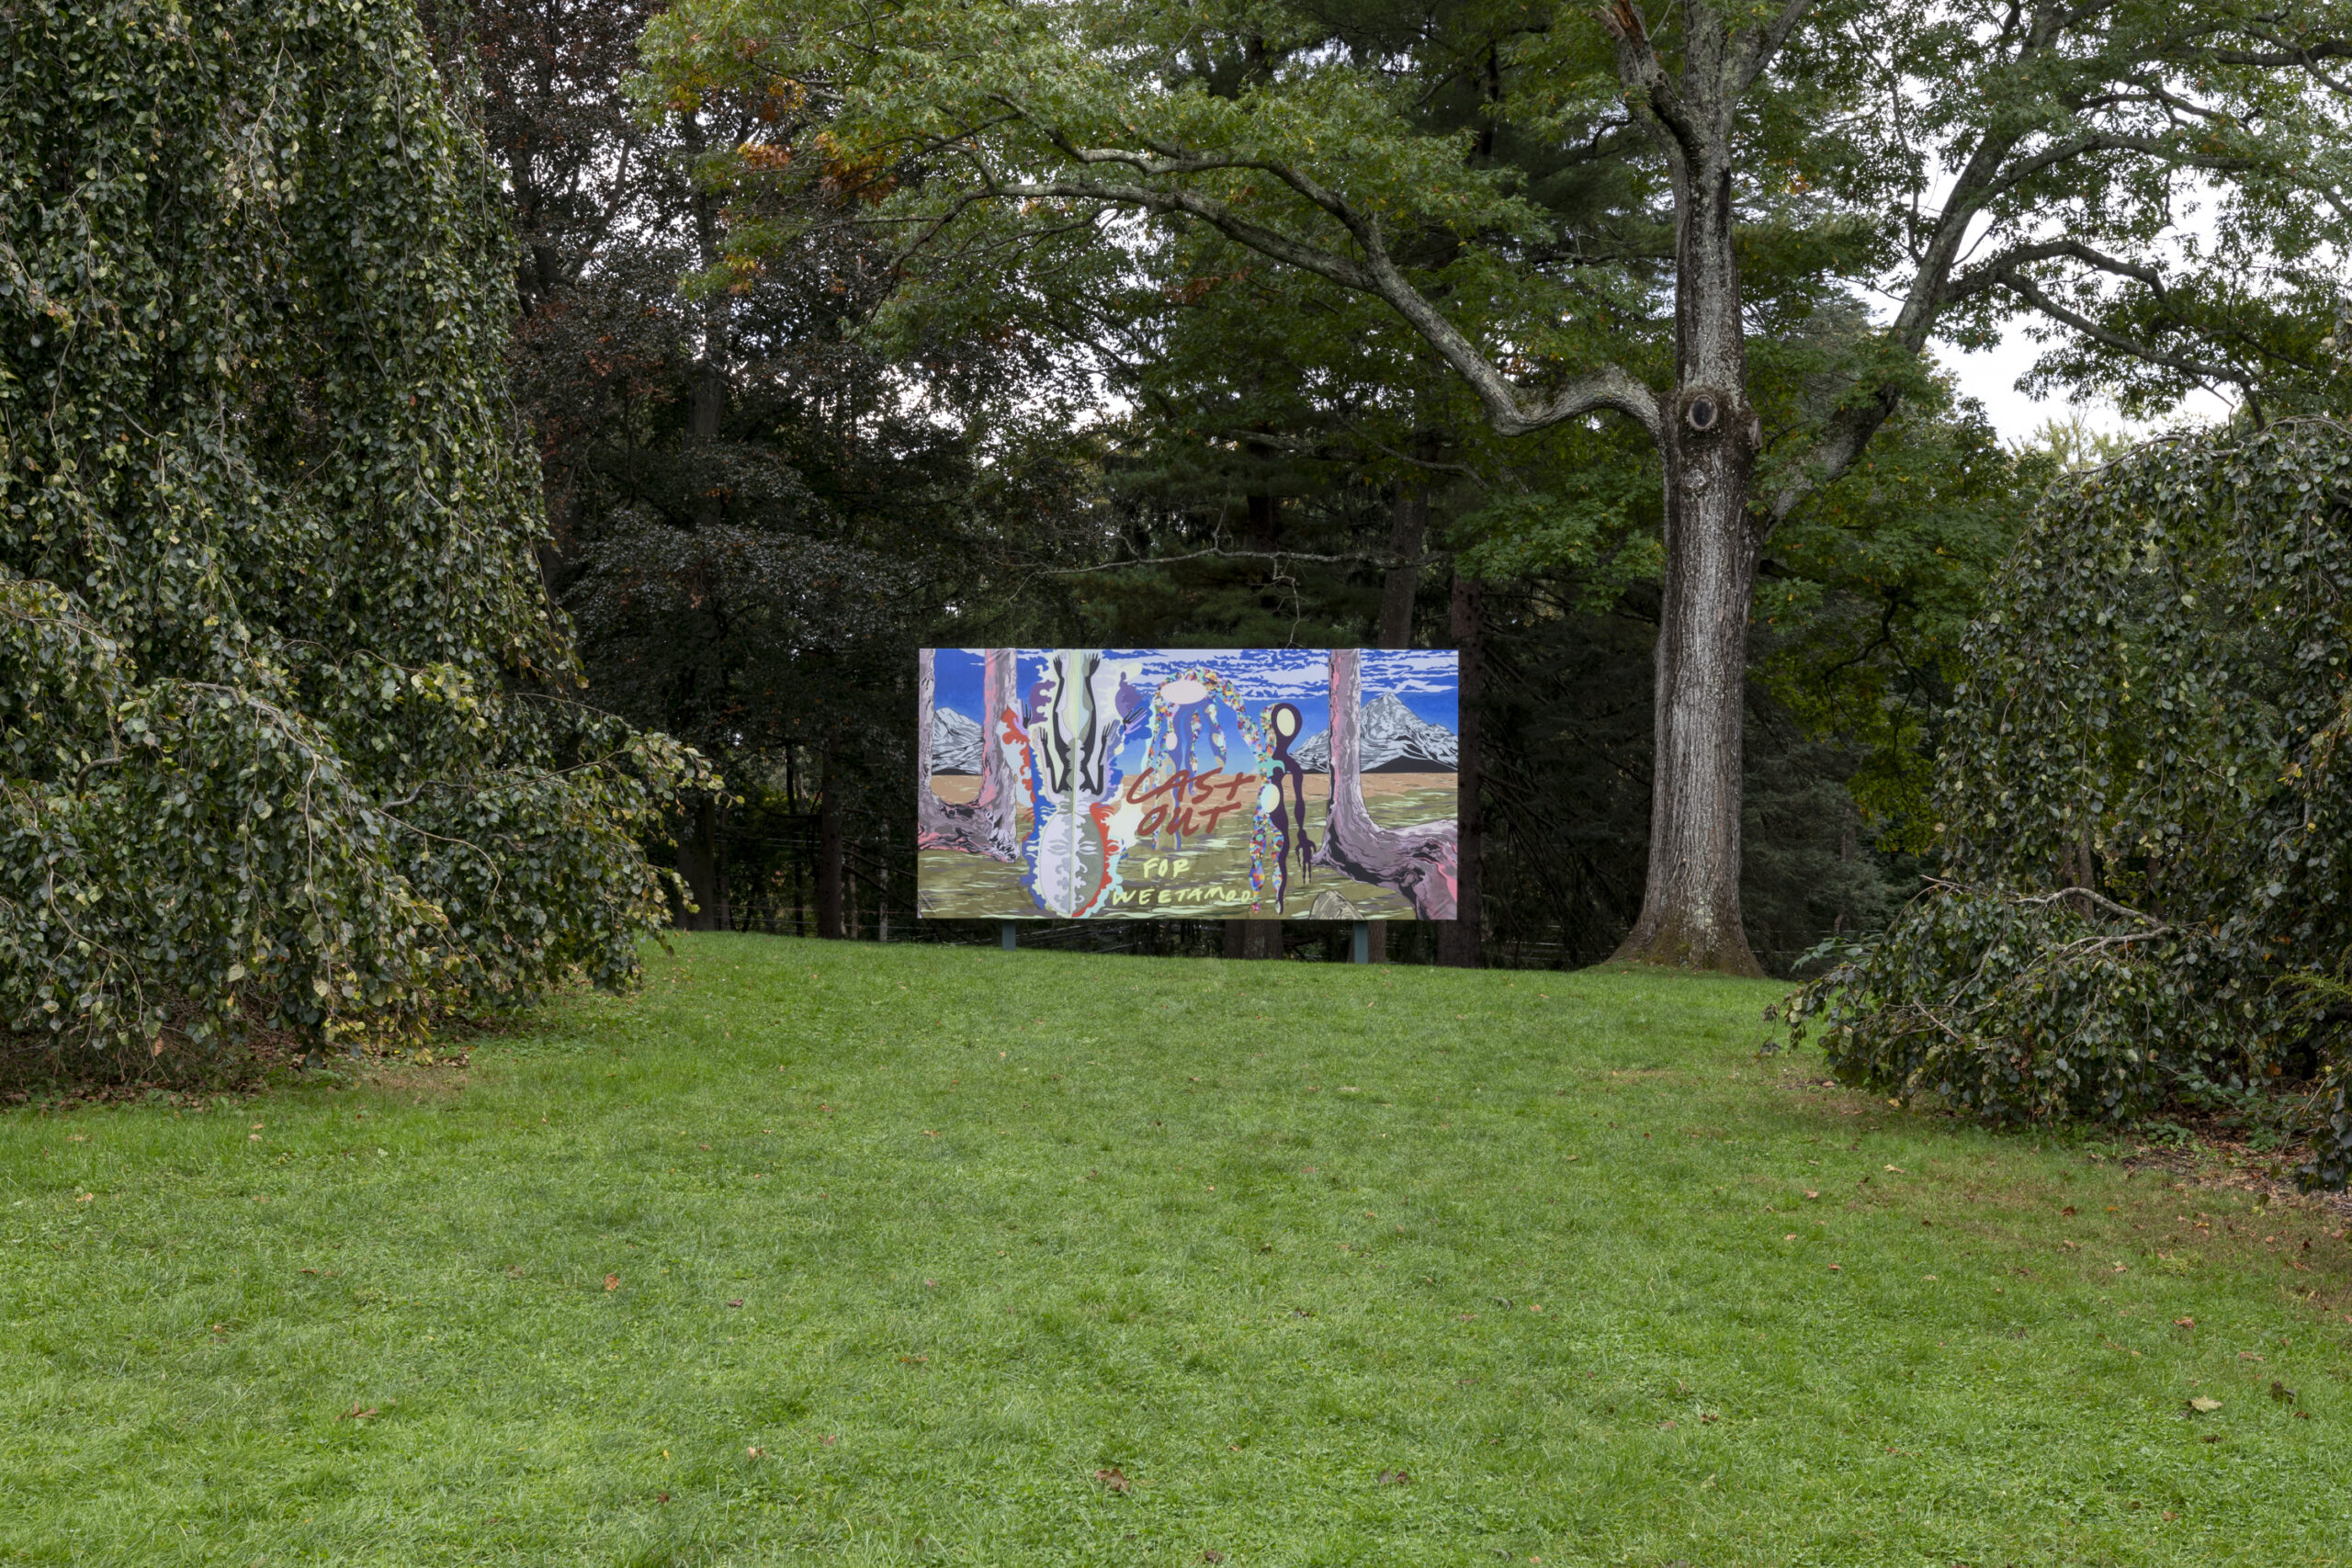 a vibrant artwork on a large billboard in a green park